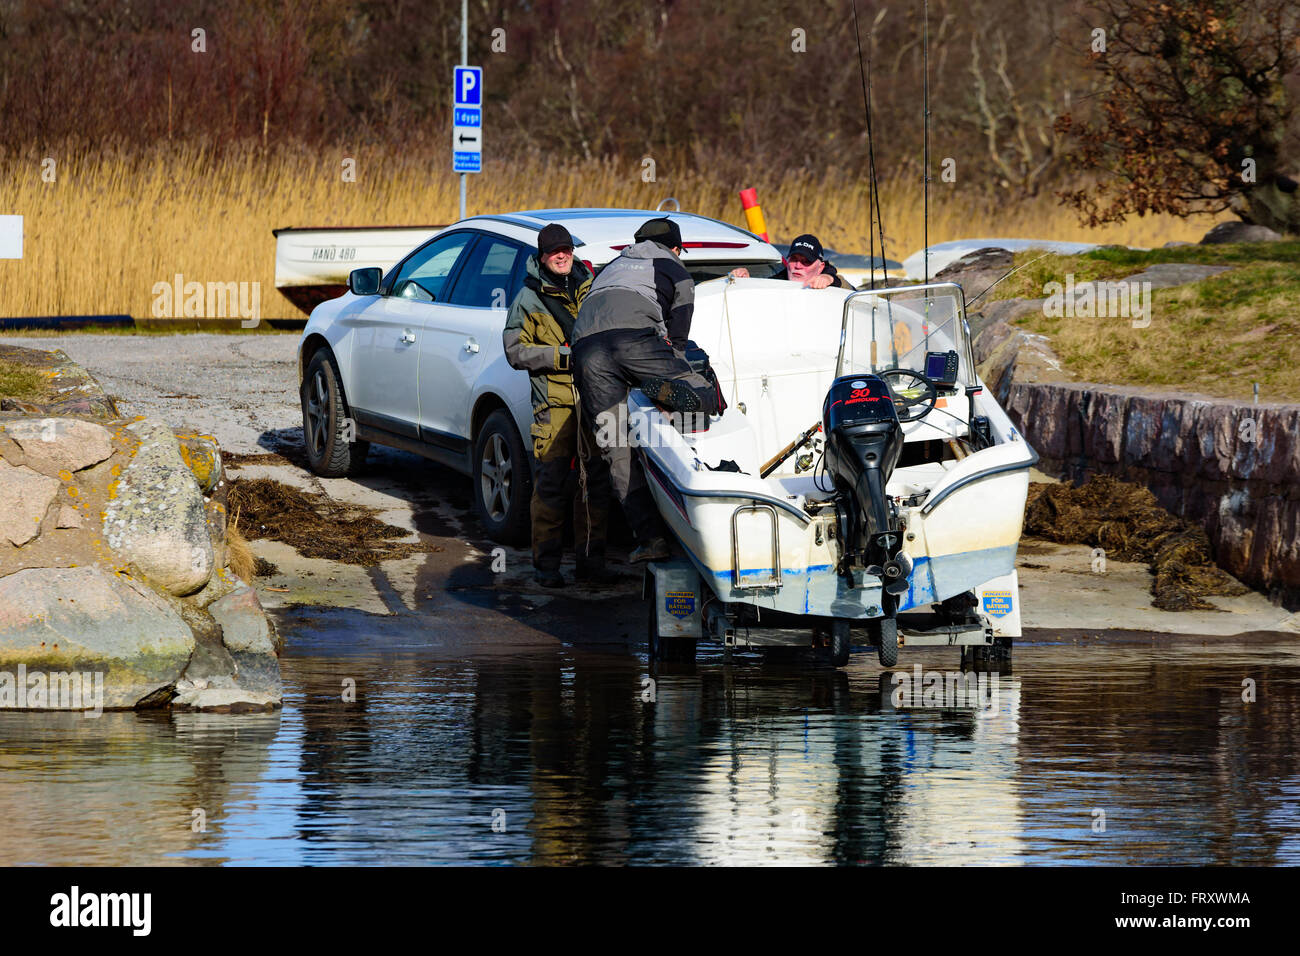 Torhamn, Sweden - March 18, 2016: The launching of a small plastic motor boat at a ramp in the marina. One person climb in to th Stock Photo